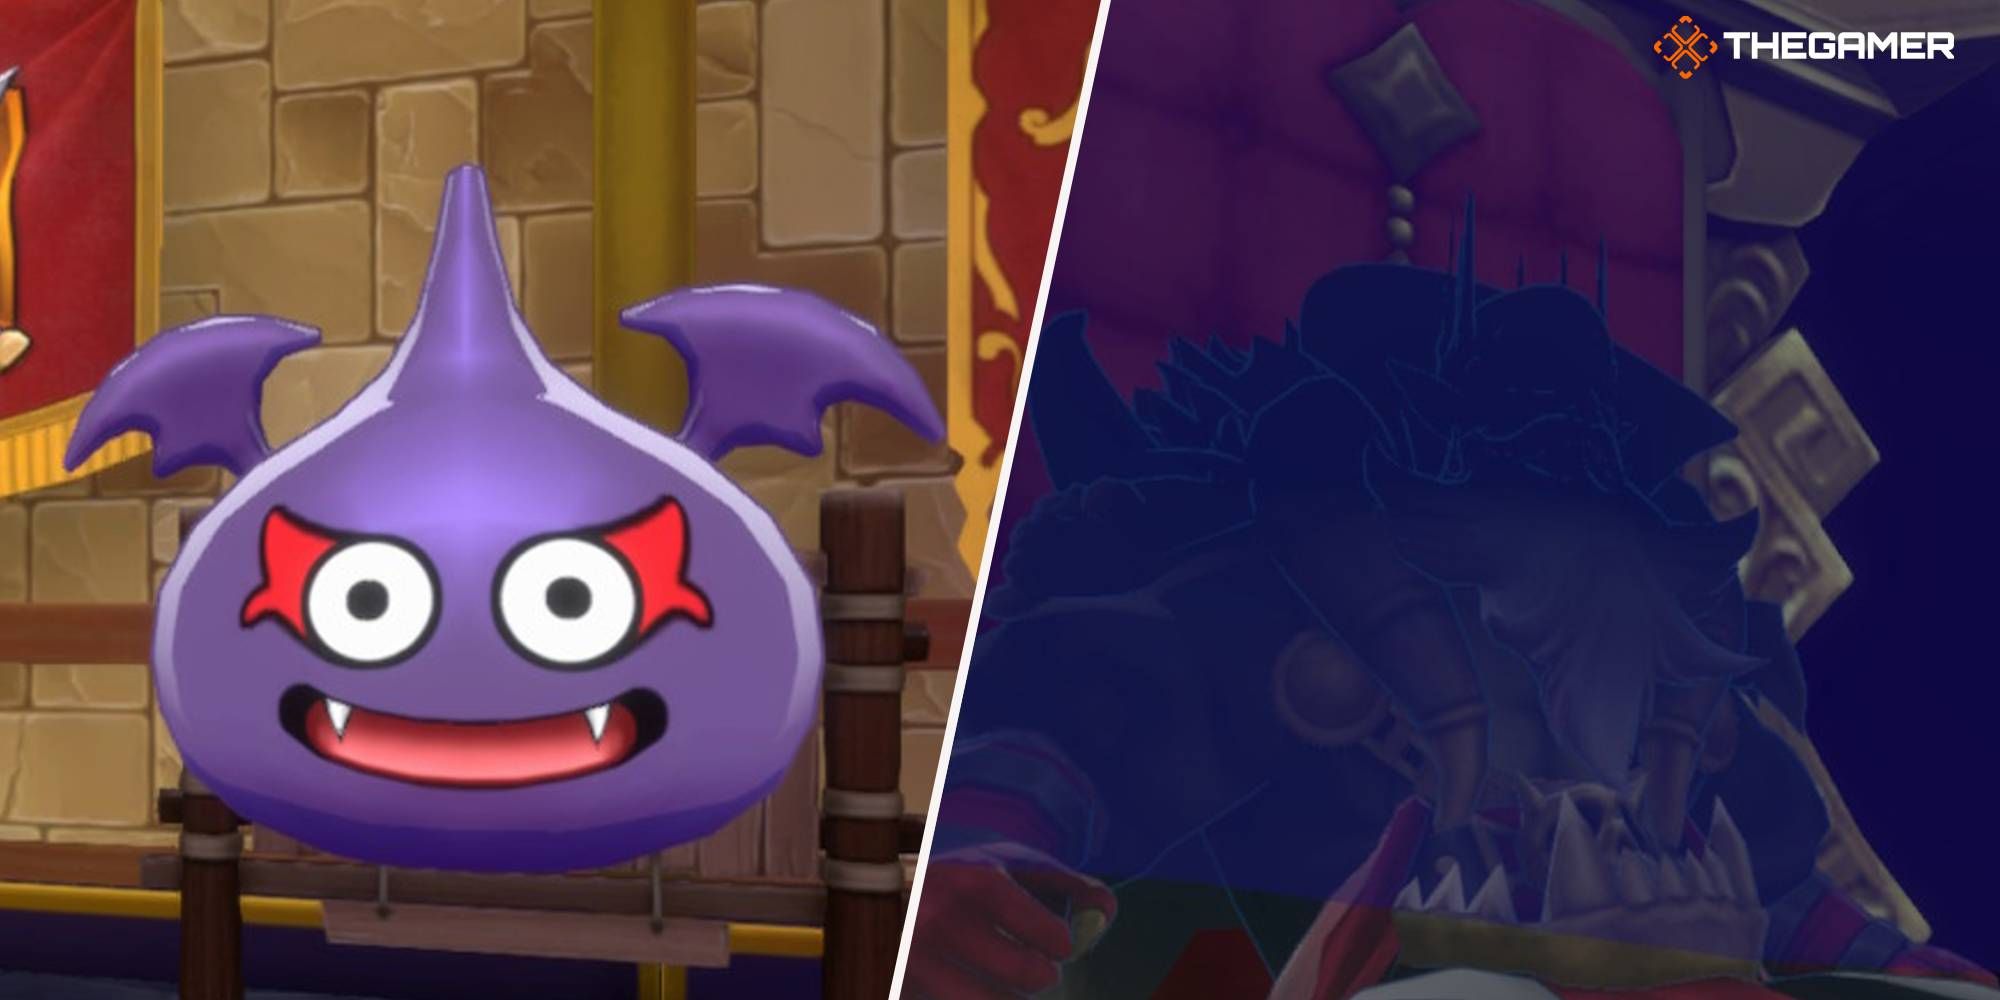 Dragon Quest Monsters The Dark Prince Cover Image of Maulosseum Attendant Slime and Randolfo